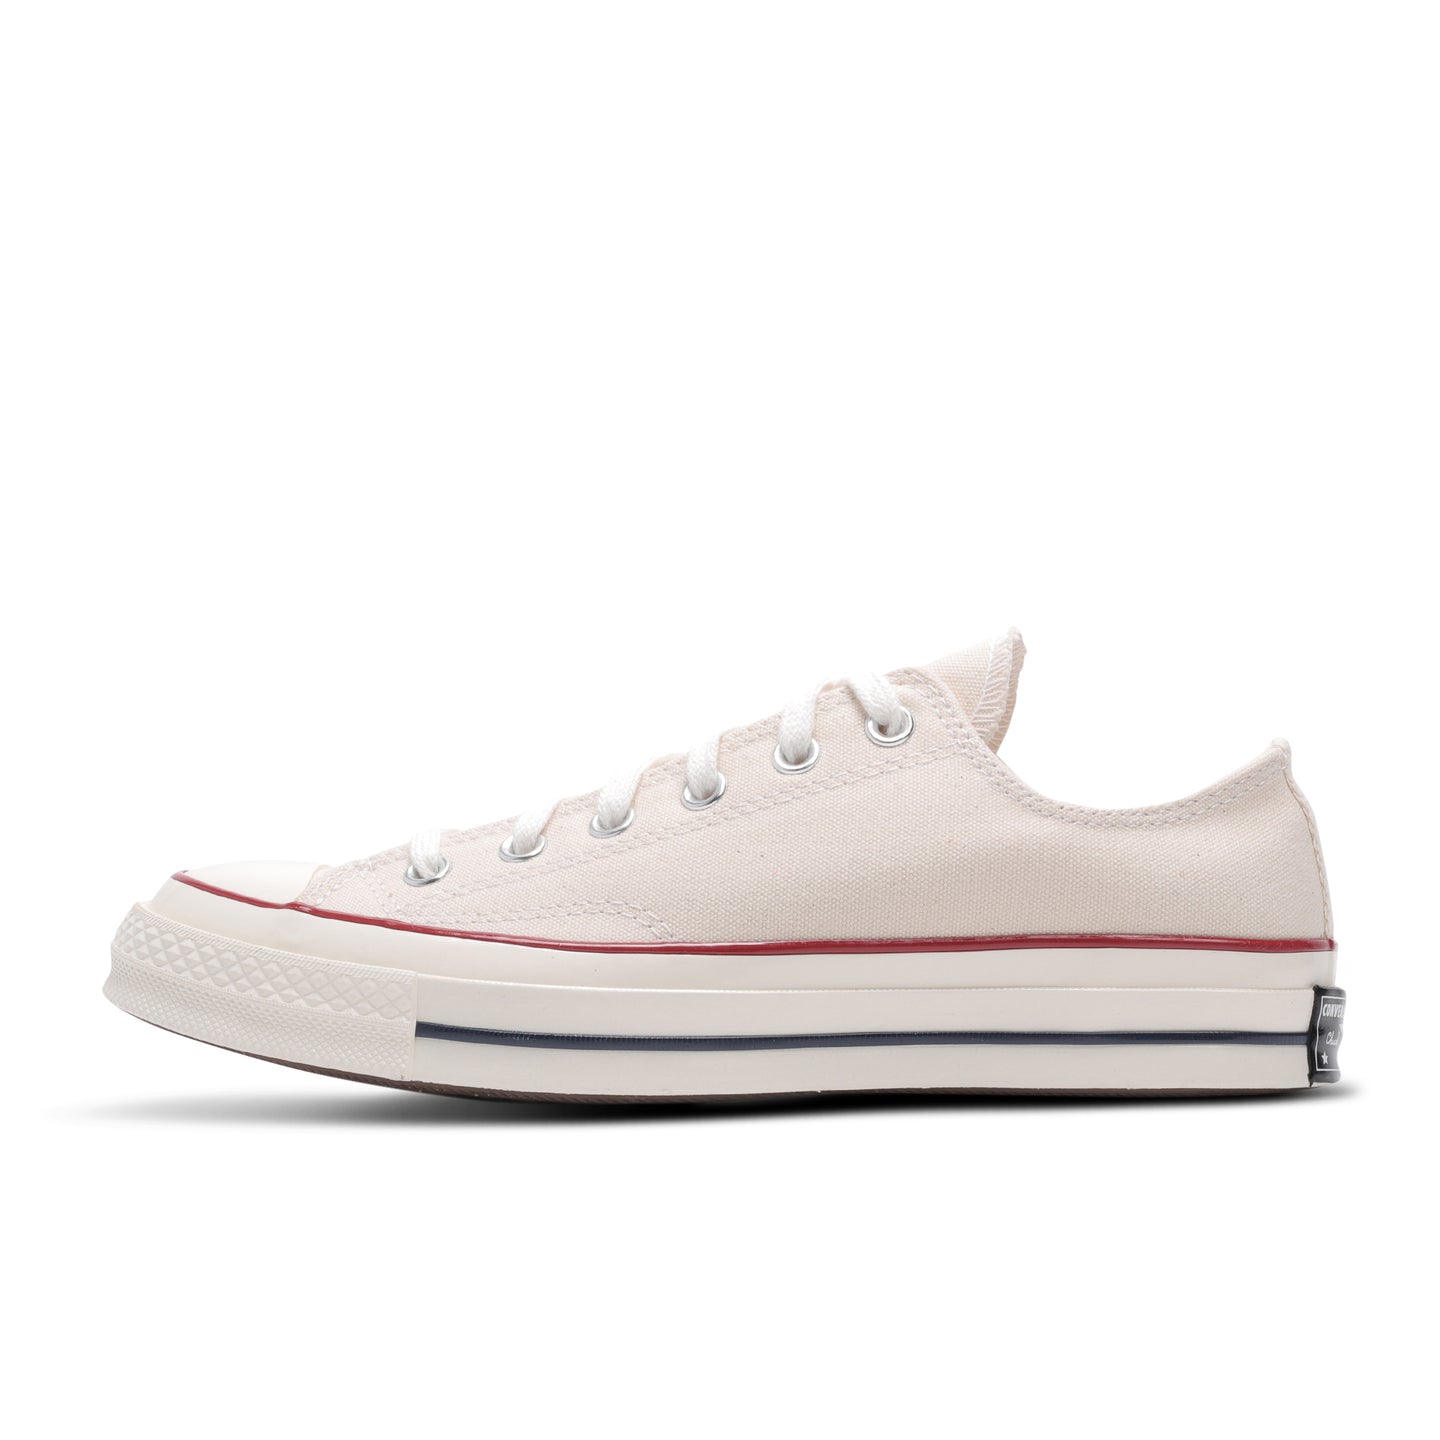 Converse Chuck Taylor All Star 70 Ox Parchment